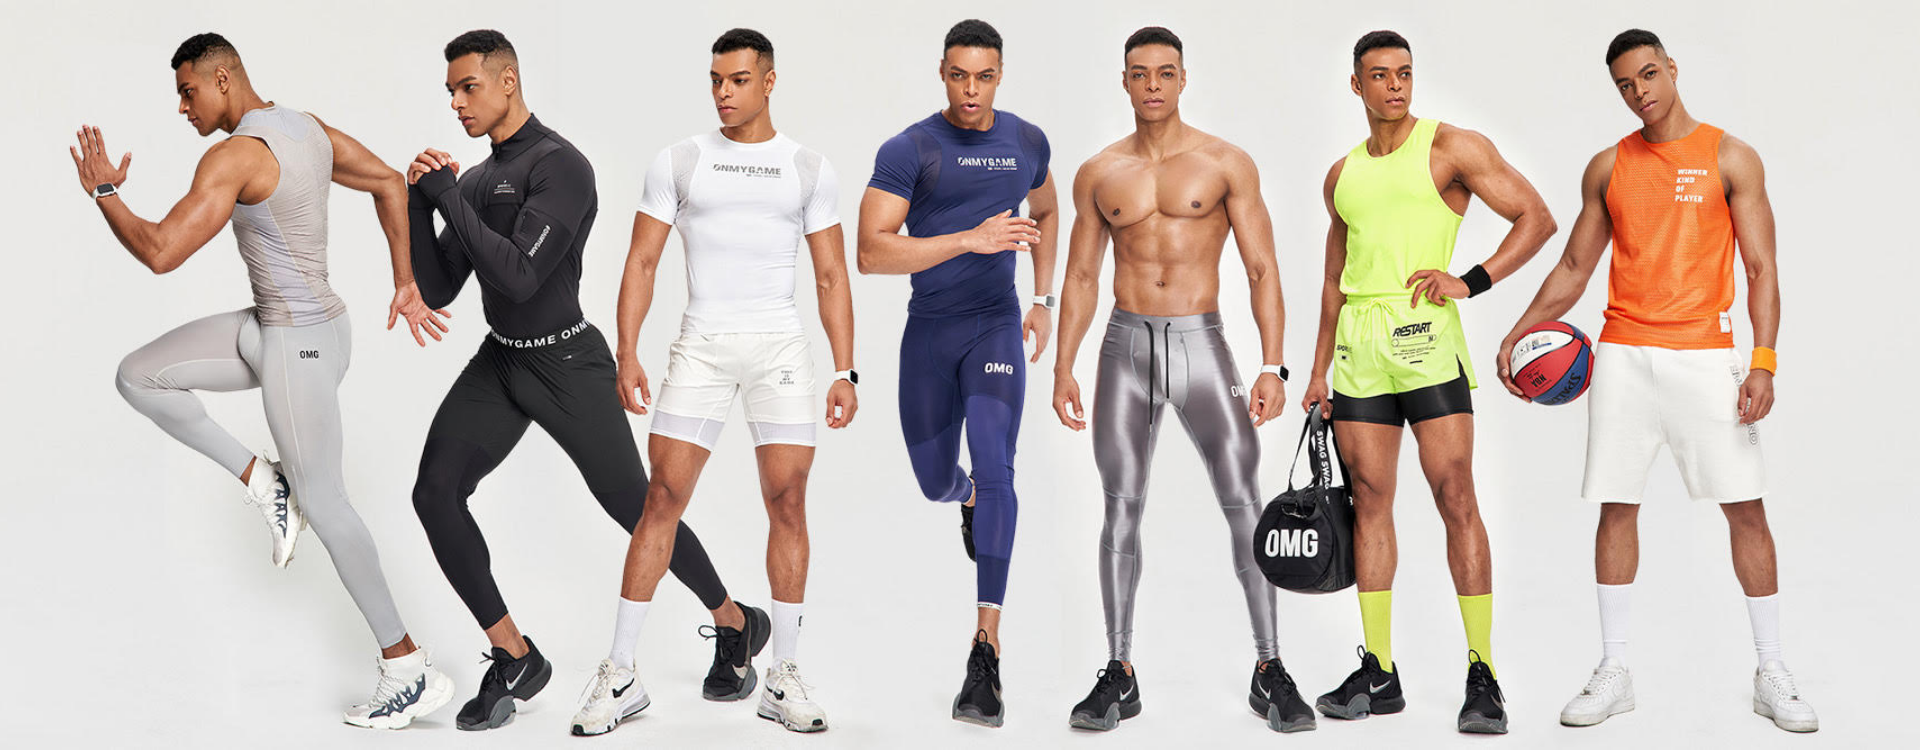 Pin on Activewear and Swimwear. Men's Clothing